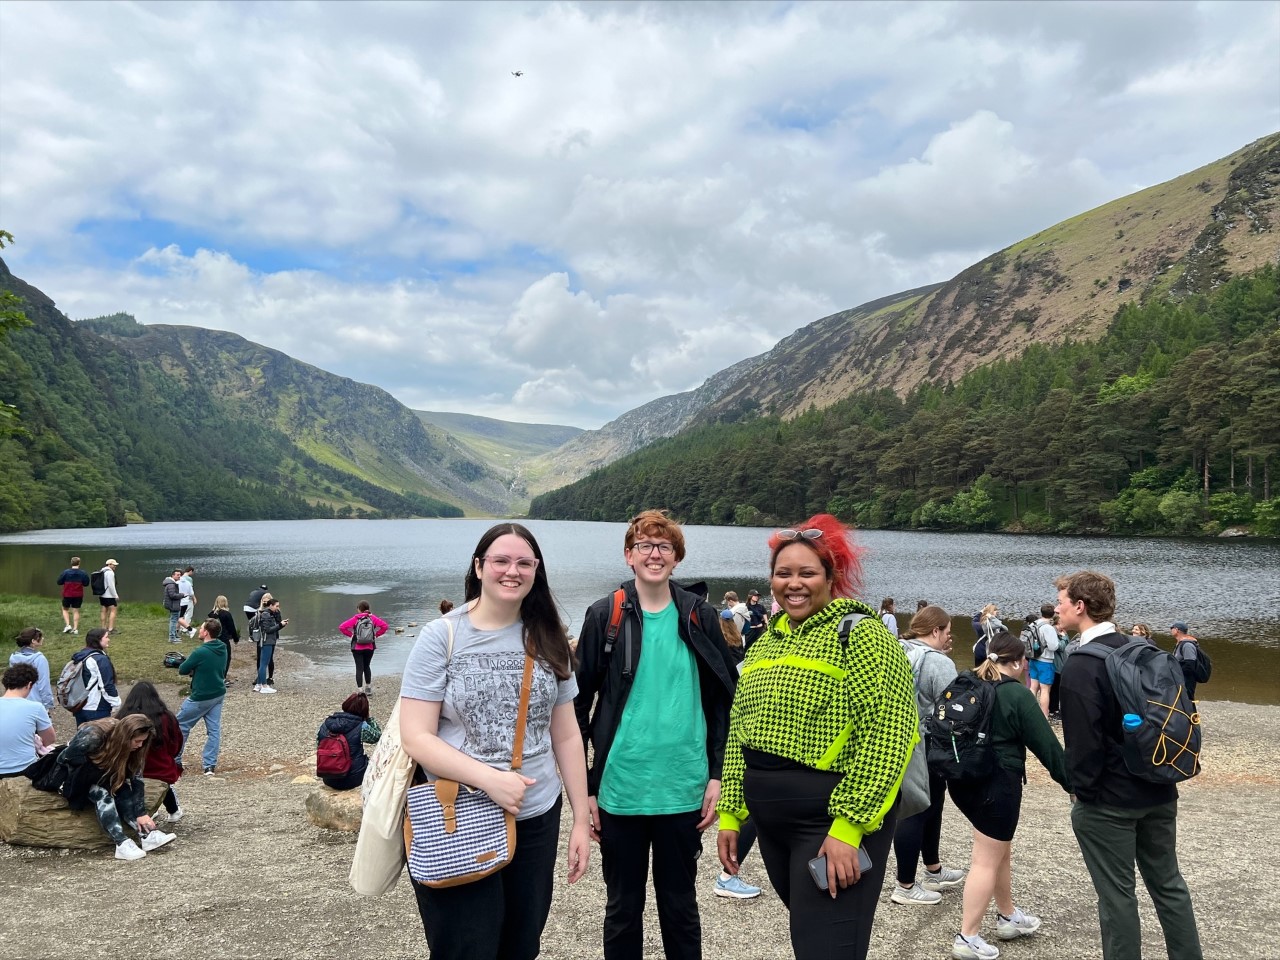 Parr, Ogle, and Brooks enjoyed  the day with other interns across  the US in Glendalough, Ireland.